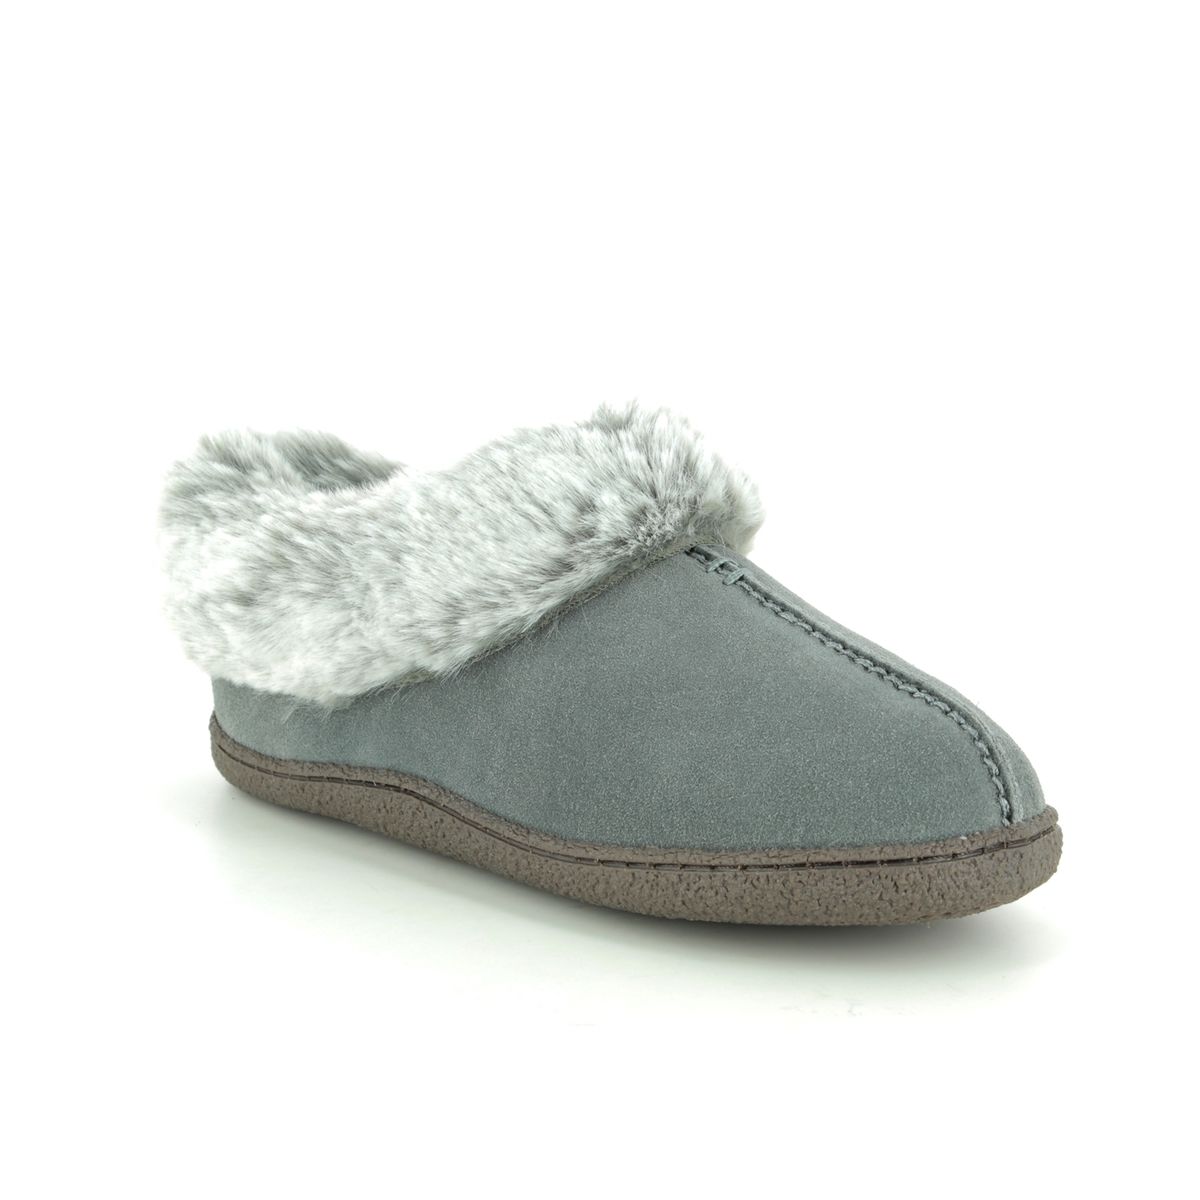 clarks womens house slippers